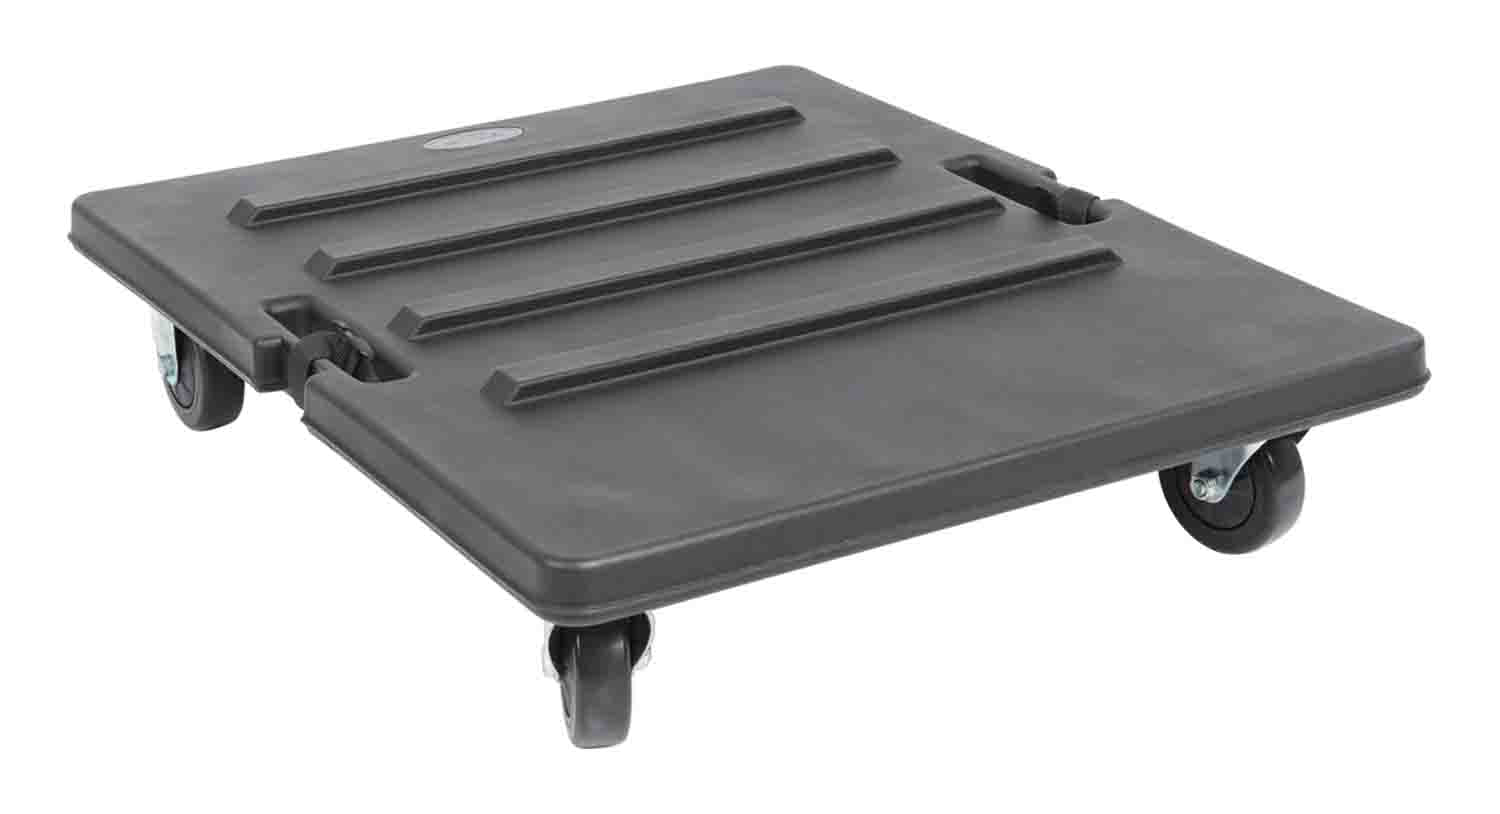 SKB Cases 3RR-RCB Roto Molded Caster Board with 4-Locking Wheels for 3RR and 3RS Shock Rack Cases - Hollywood DJ